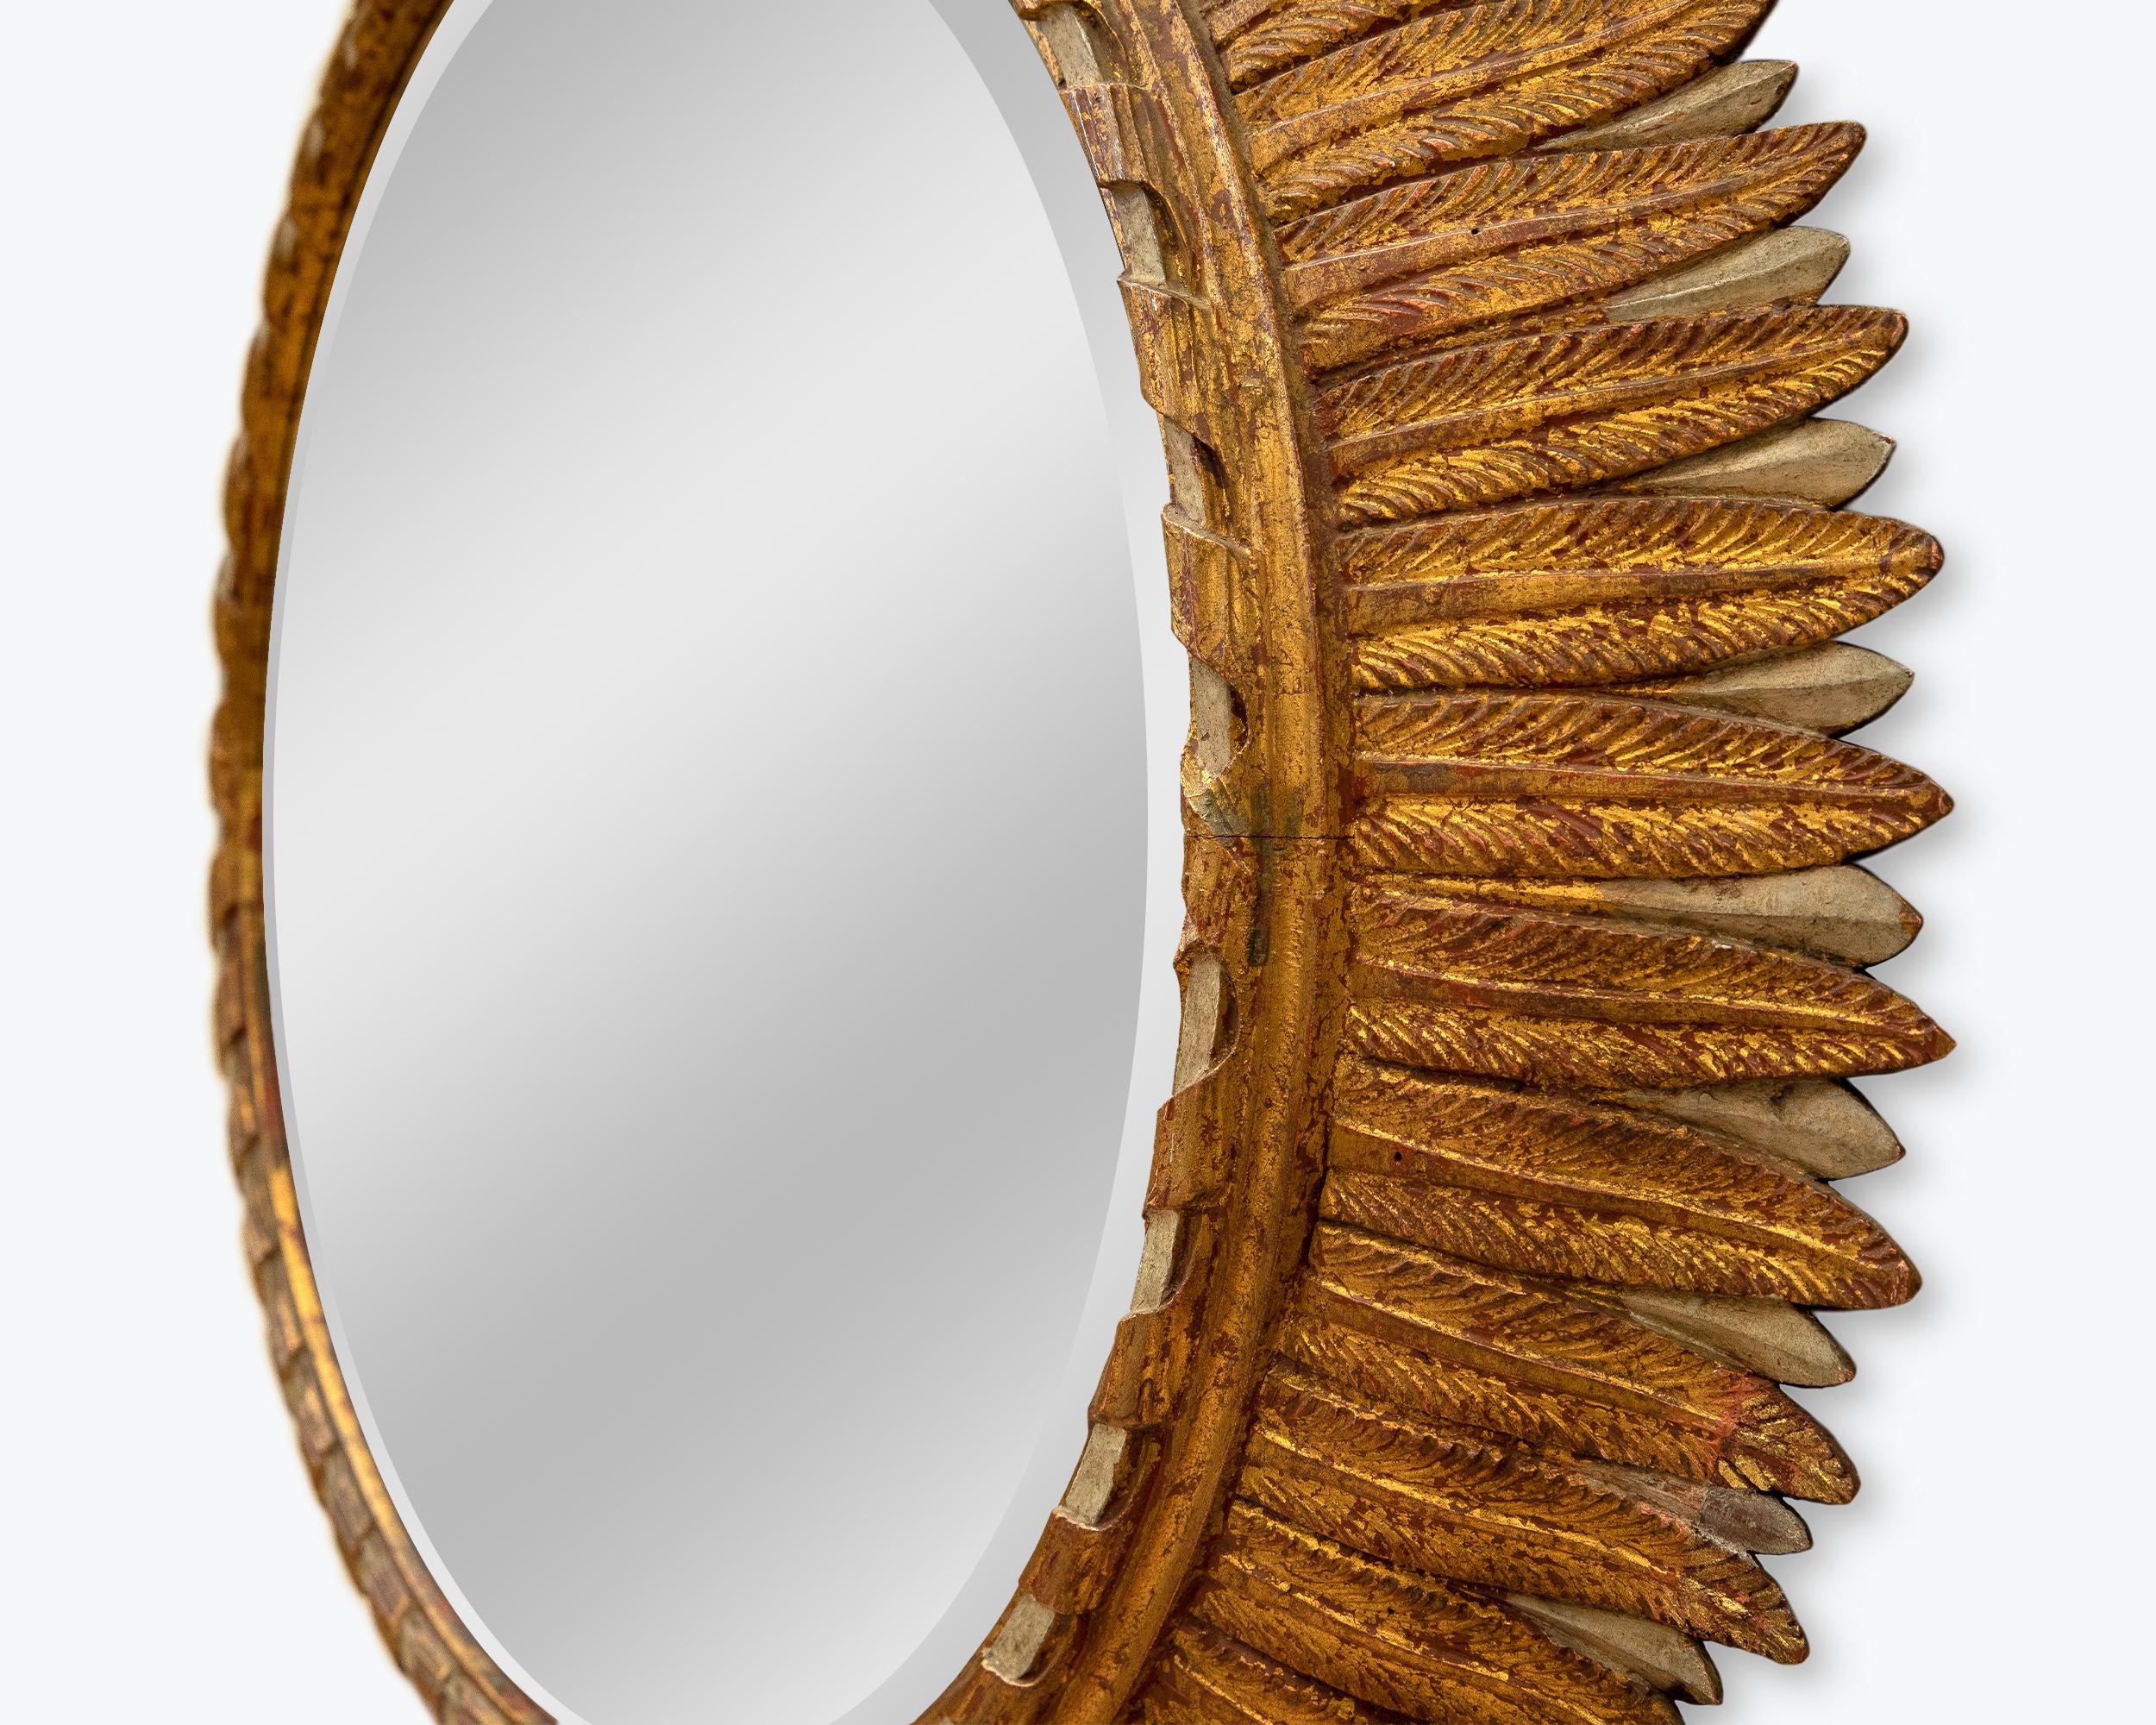 Patinated carved wood and gold leaf mirror, attributed to Maison Jansen, France, circa 1950.